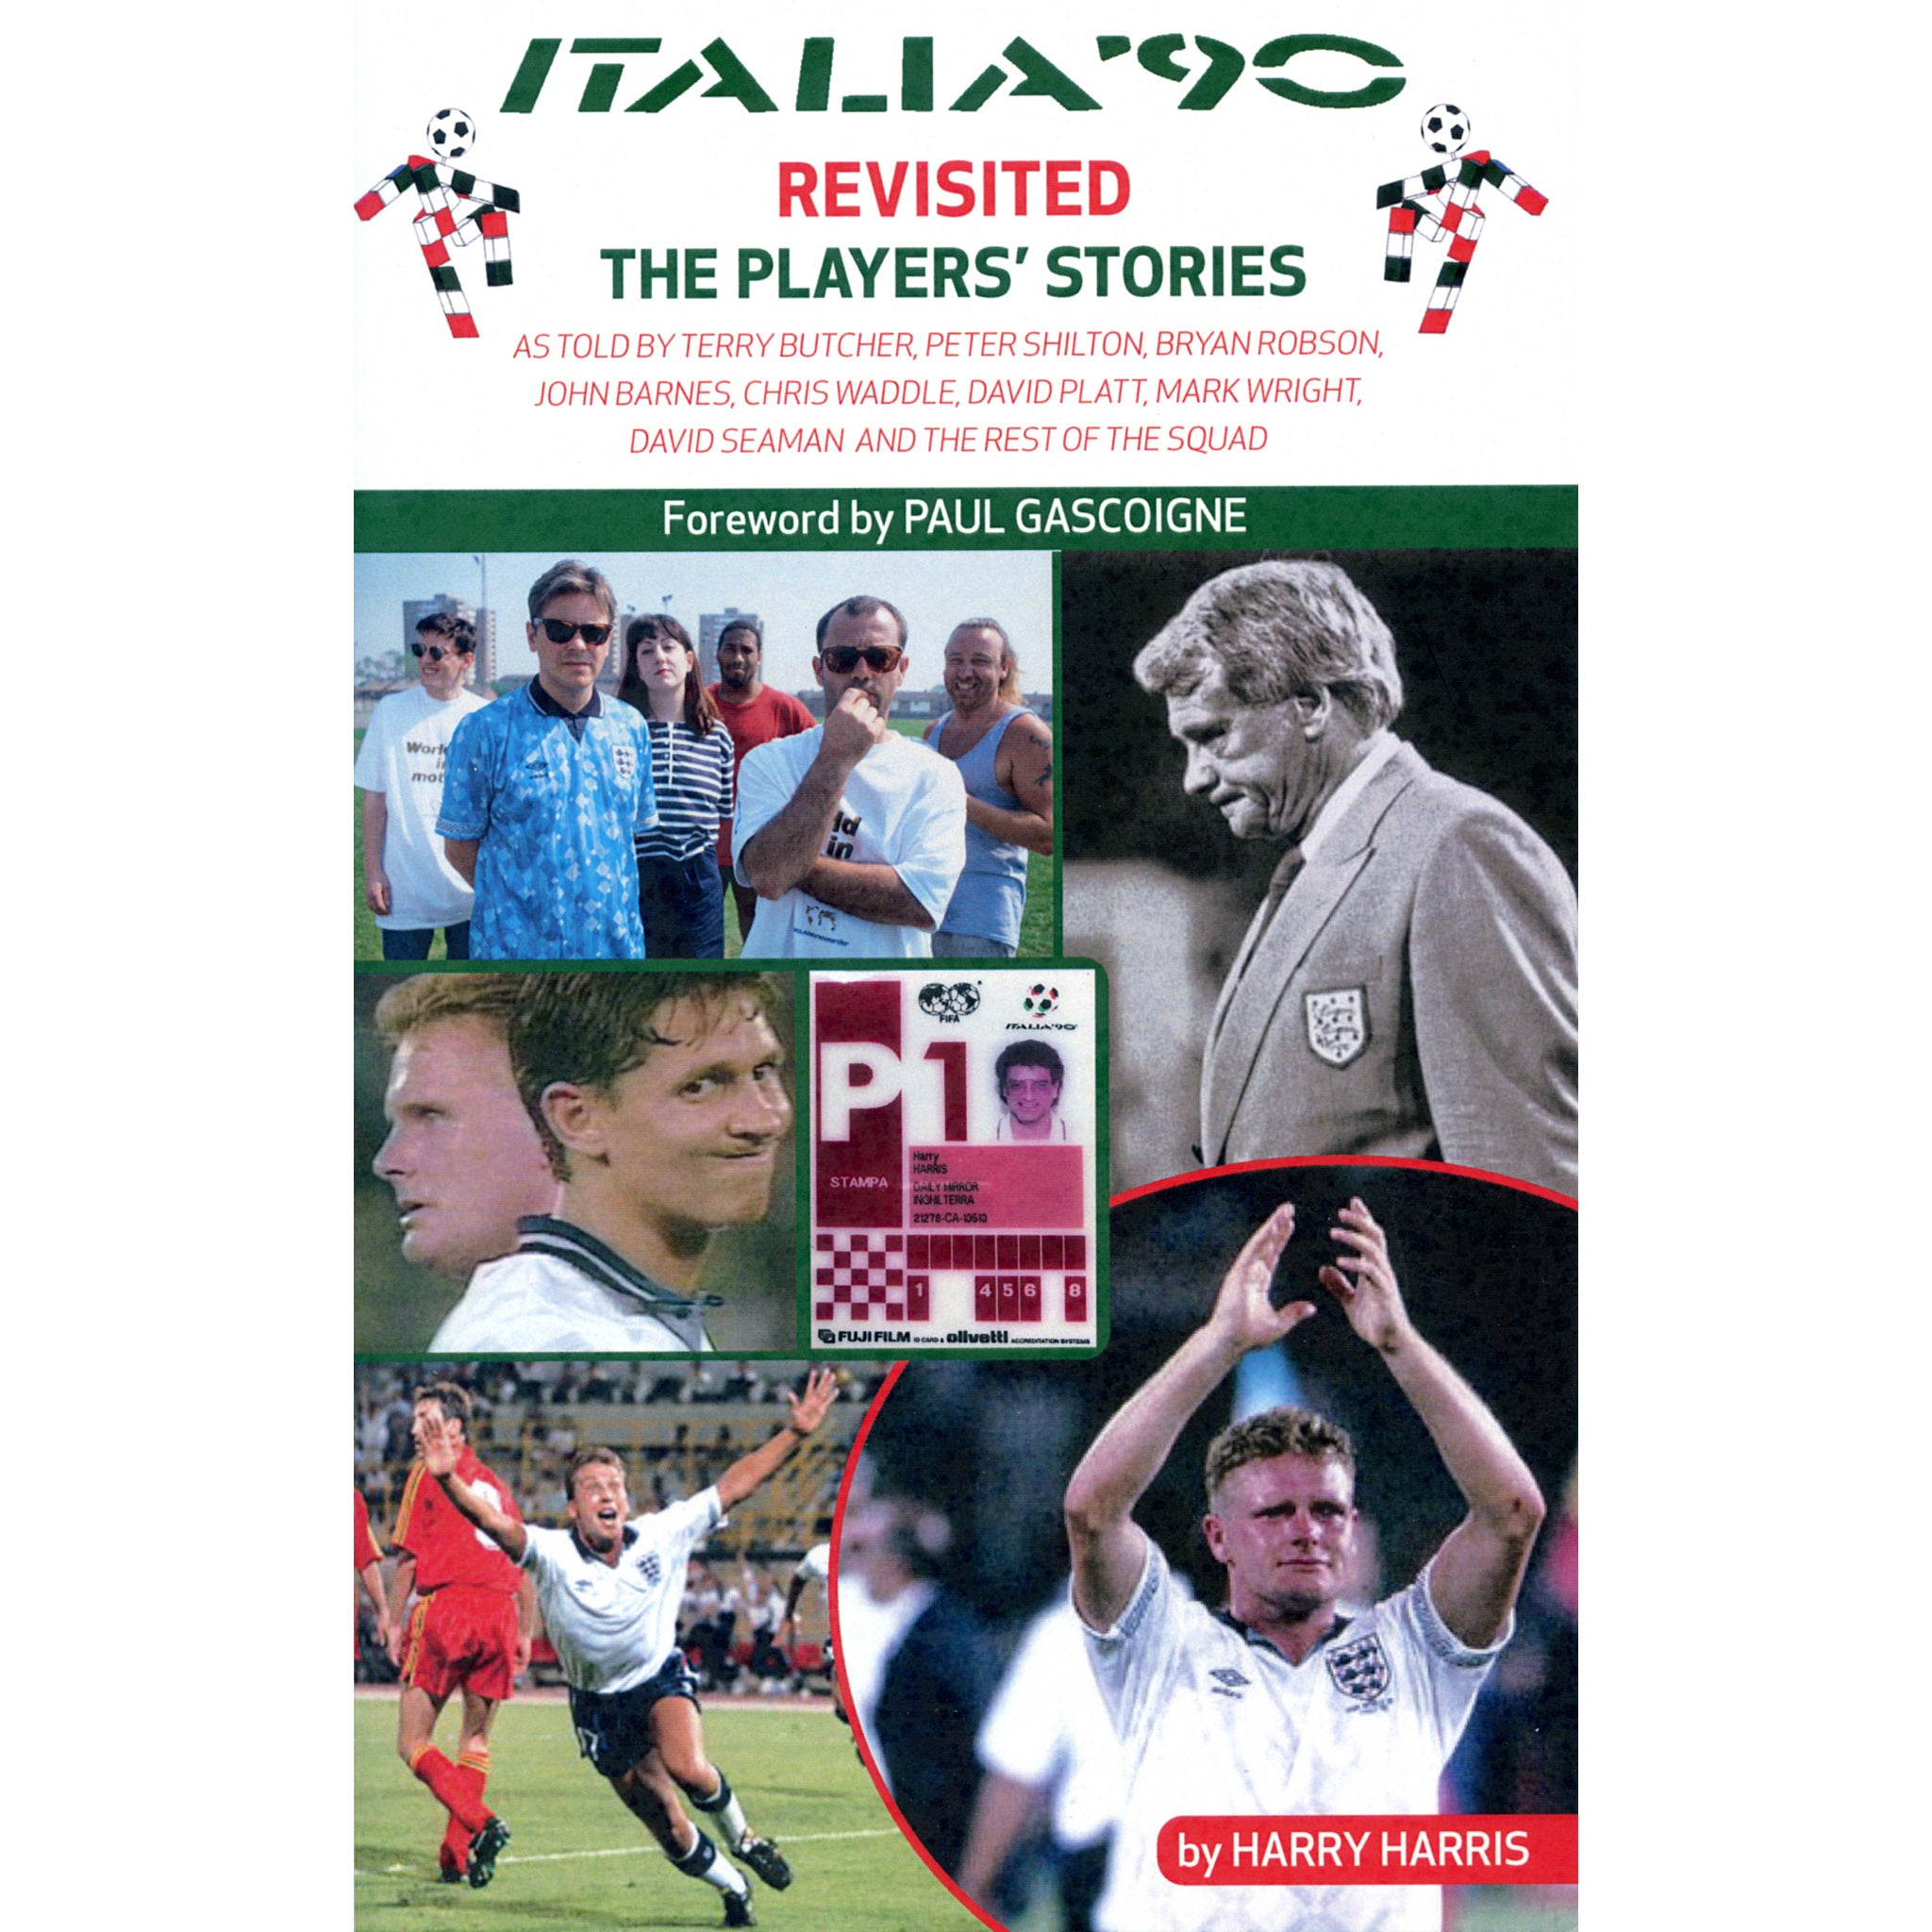 Italia ’90 Revisited – The Players' Stories